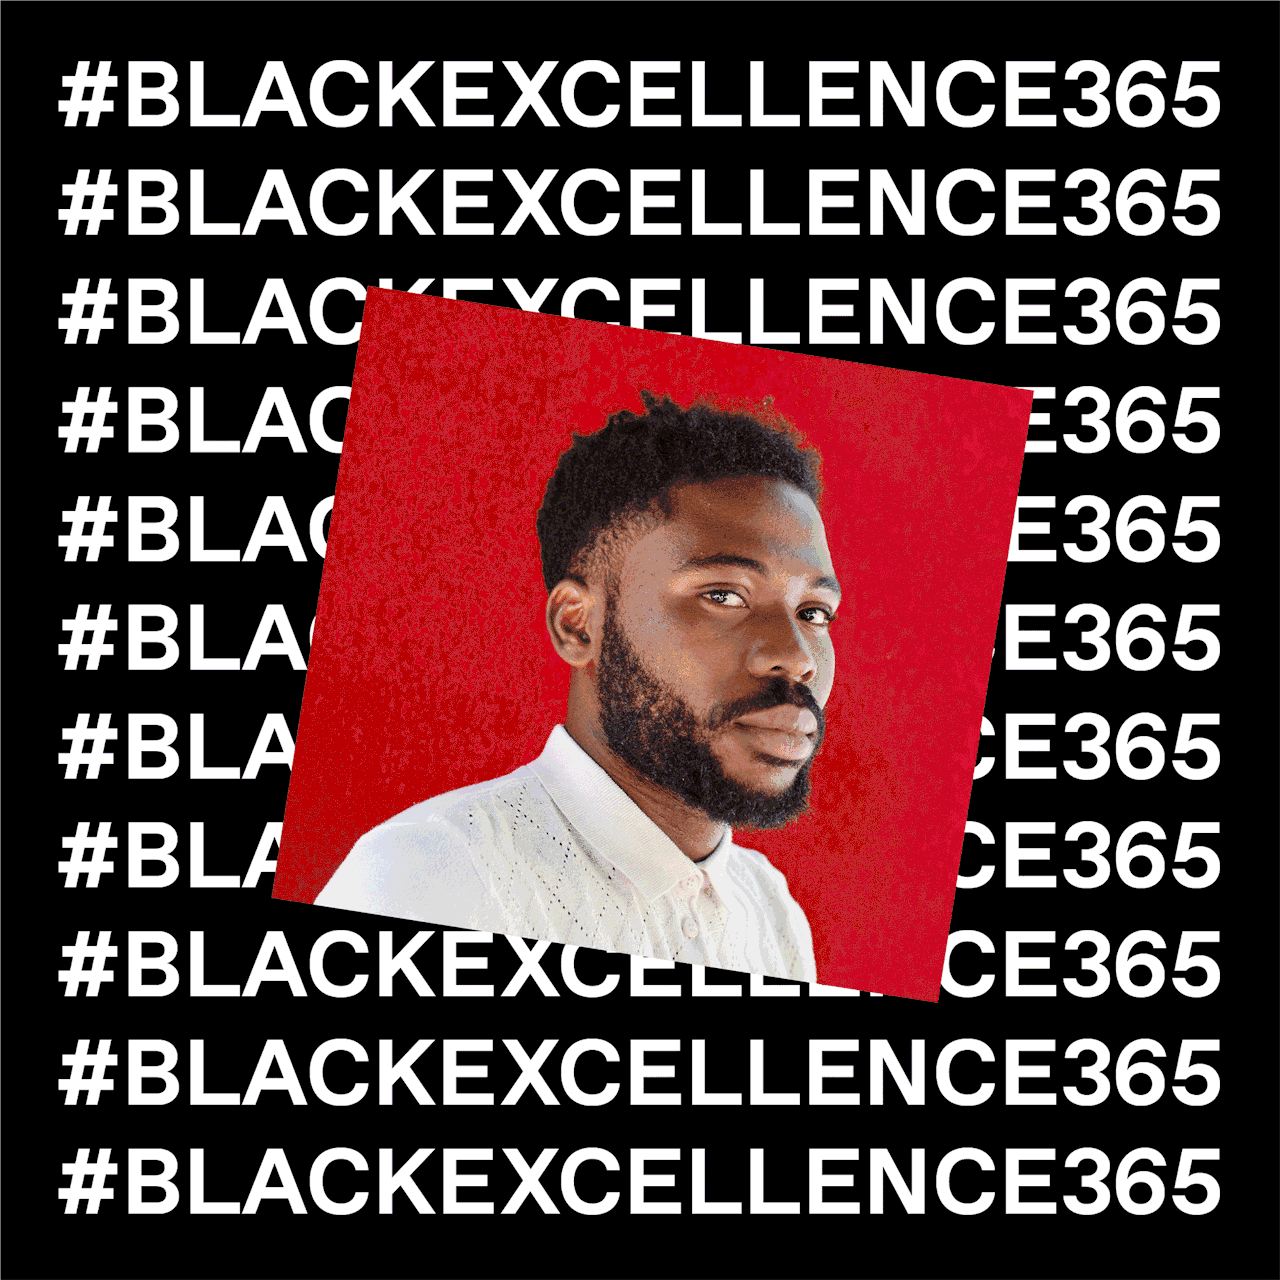 Happy Black History Month, Tumblr!
Black excellence should be celebrated 365 days a year—not just during February. That’s why #BlackExcellence365 was born exactly one year ago today. Since then, it’s been a year-round Tumblr celebration of Black...